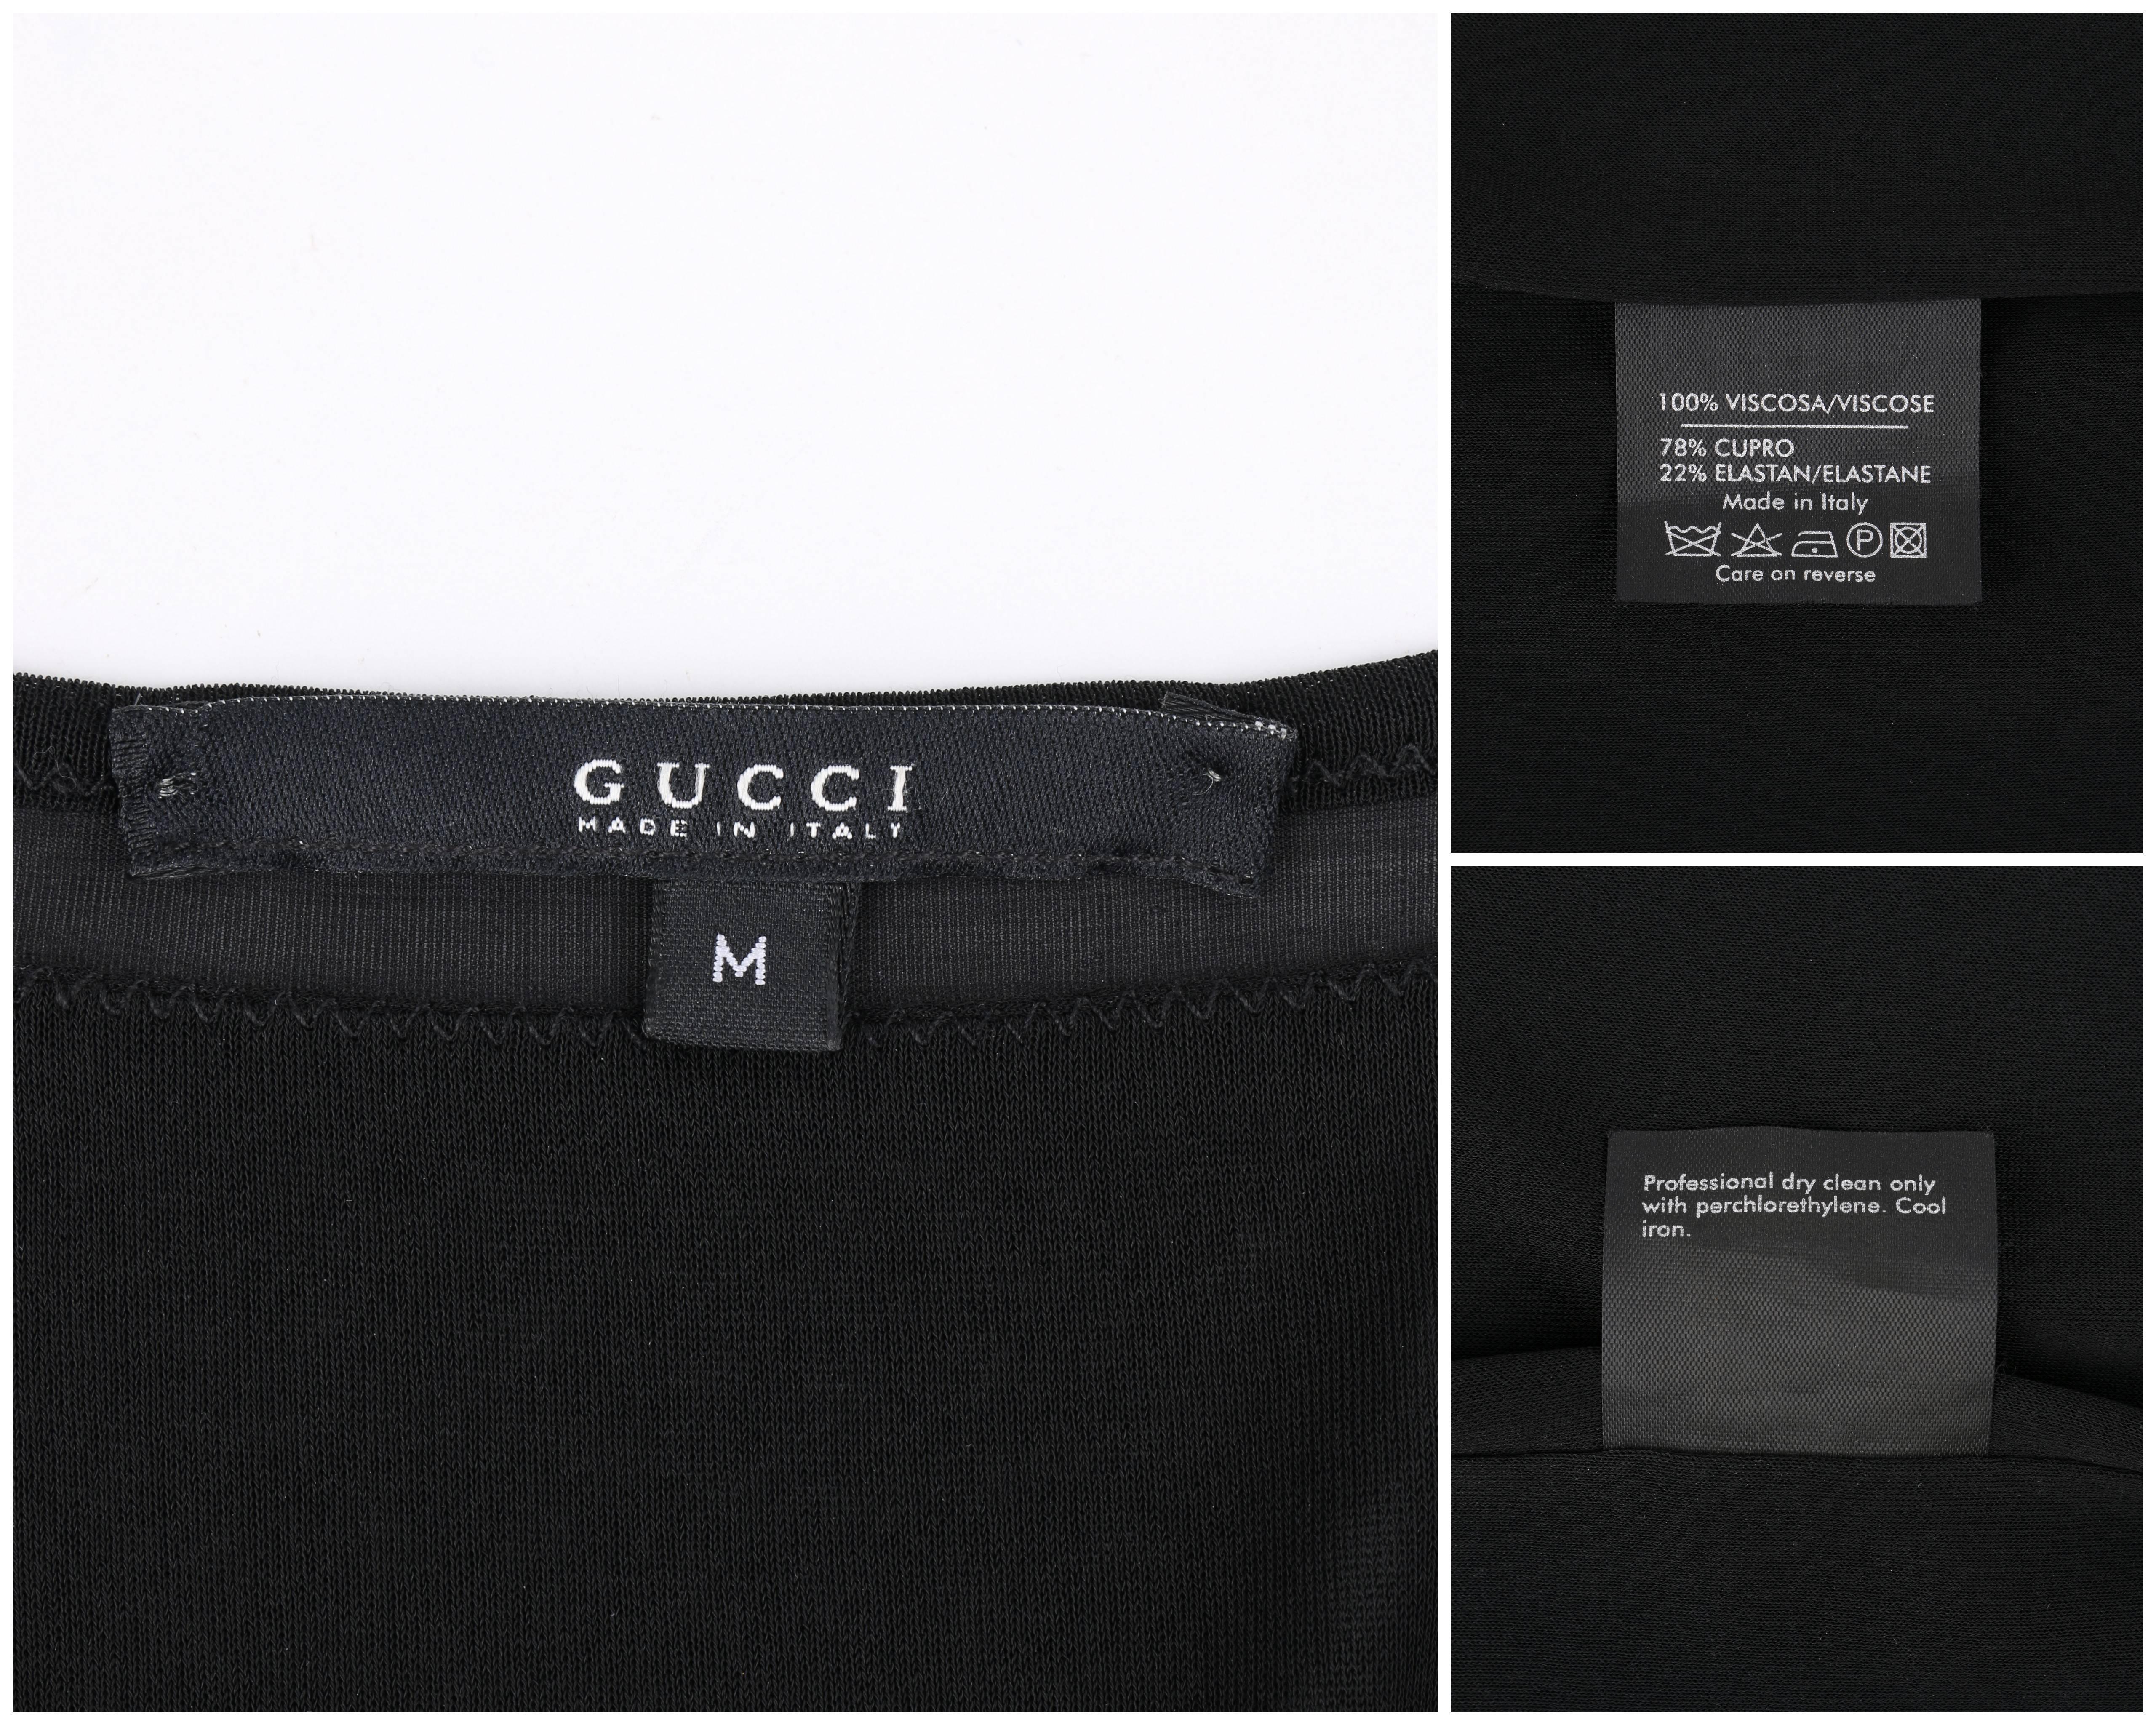 GUCCI S/S 2005 Black Knit 3/4 Sleeve Bustier Shift Cocktail Dress 3